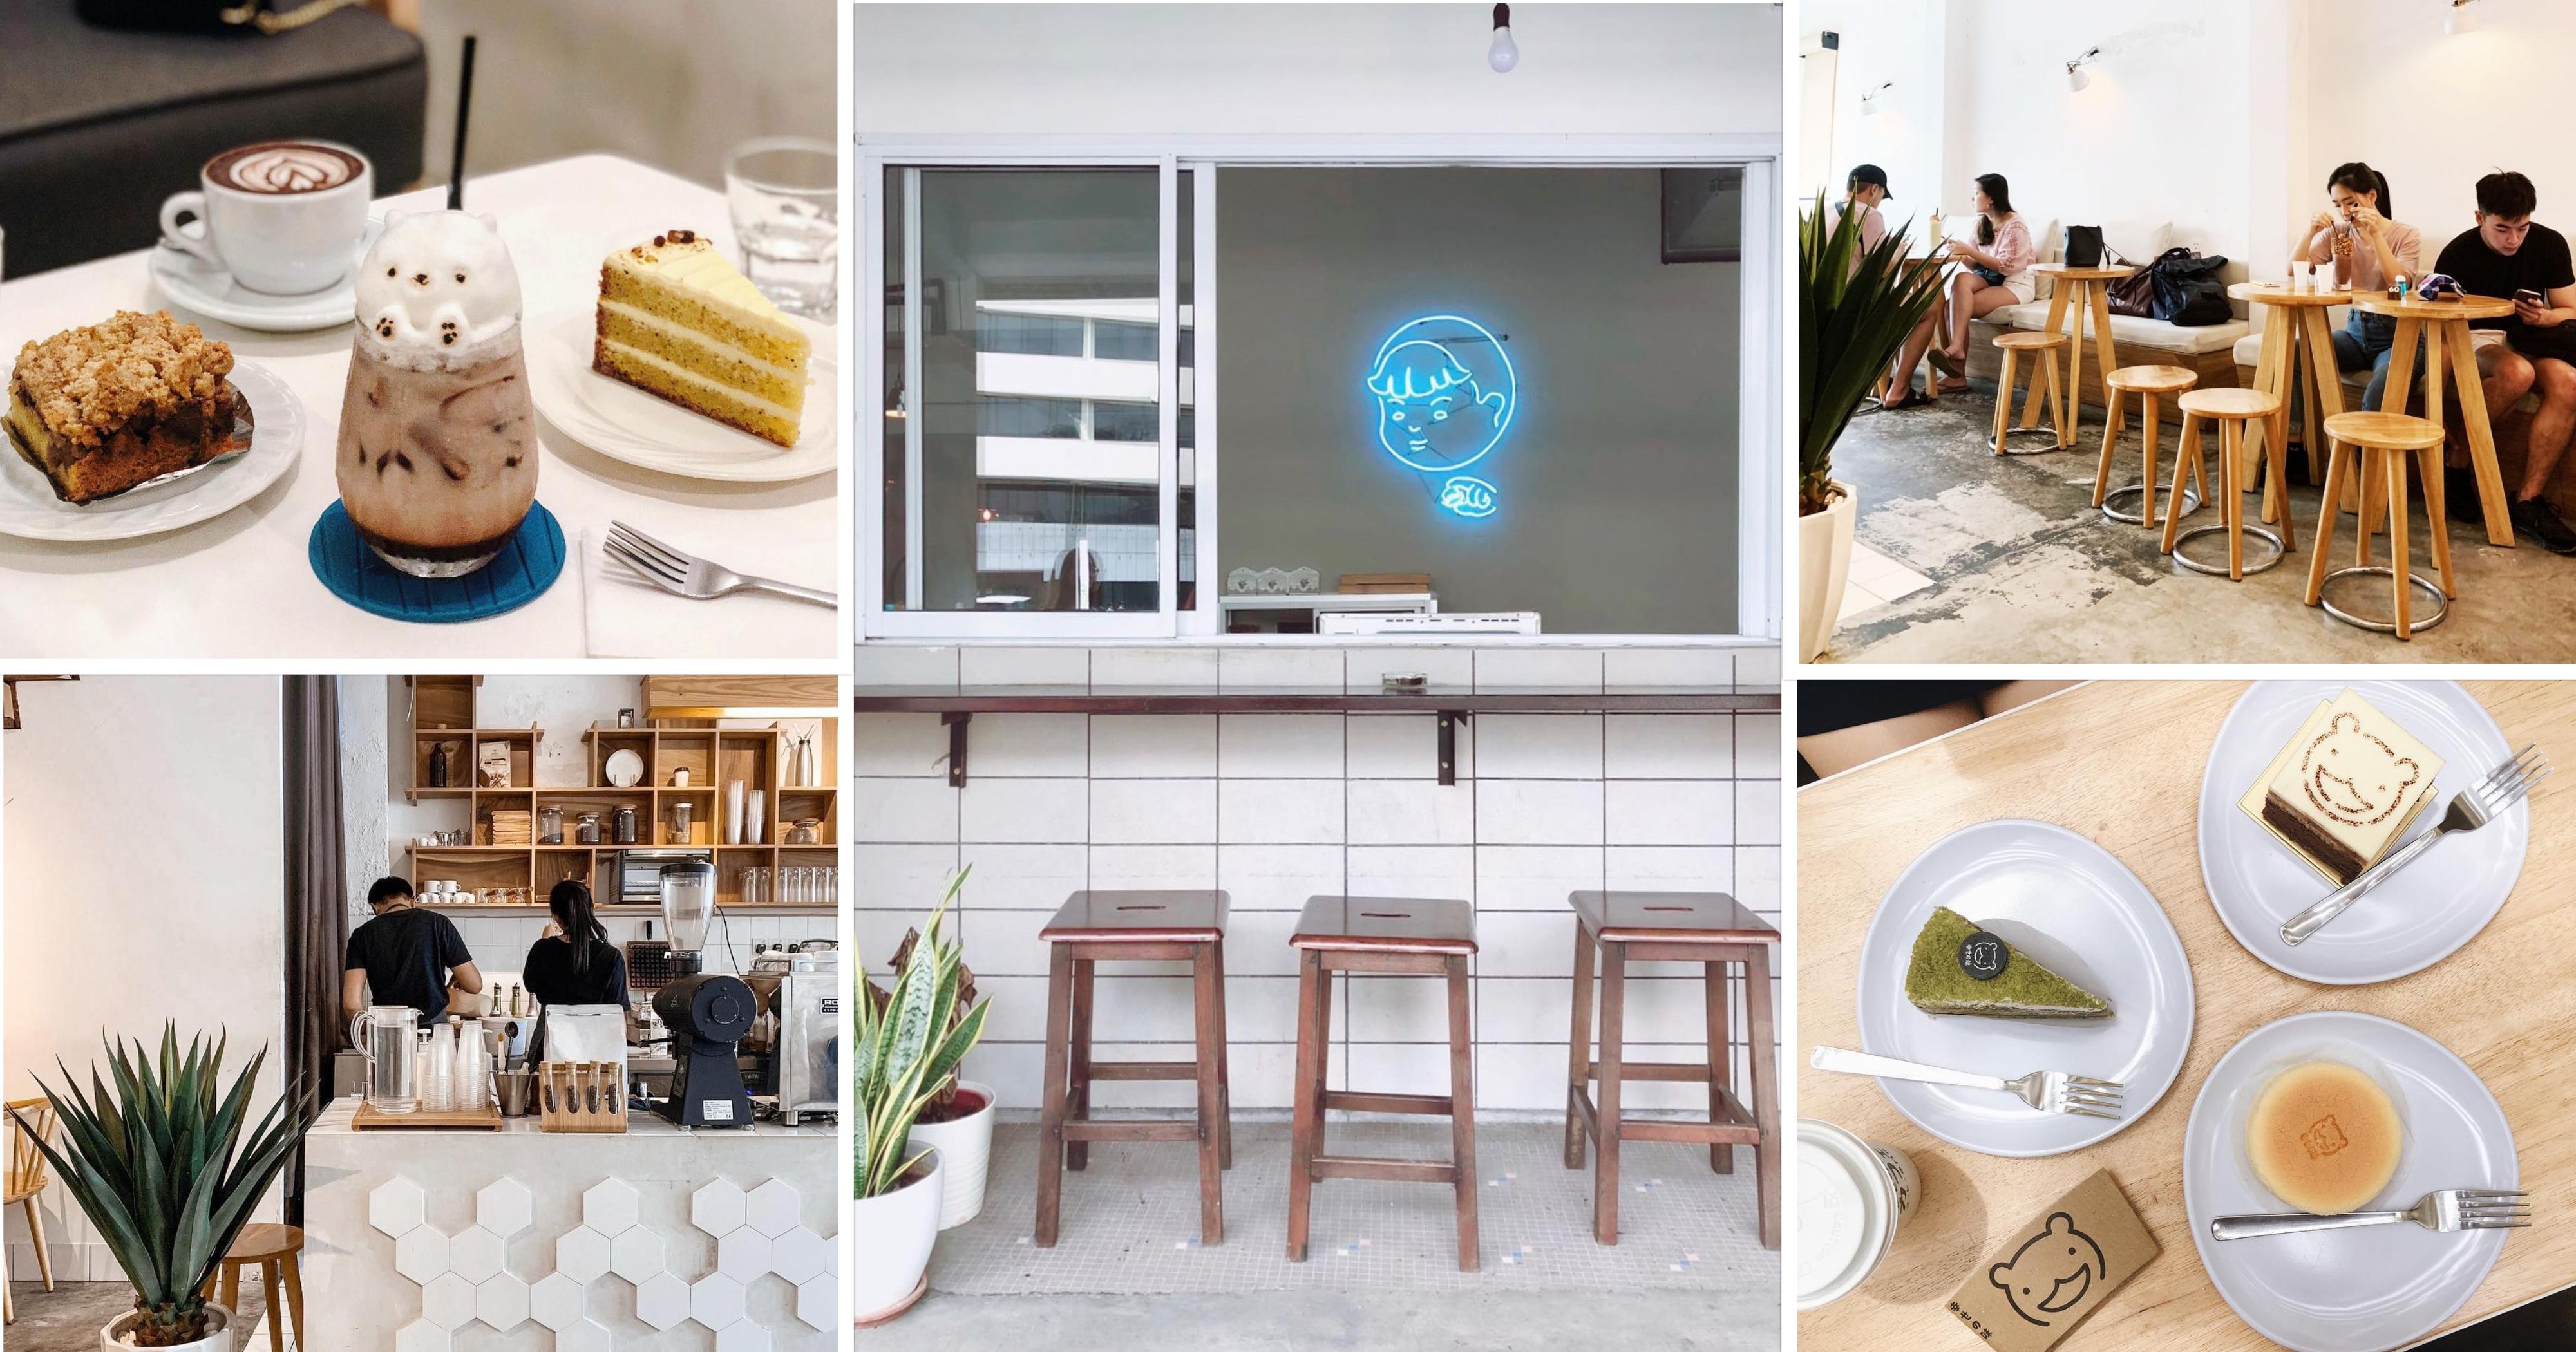 5 Aesthetic Cafes In Jb Less With Wood Accented Interiors 10 Minutes By Grab From Ciq Mothership Sg News From Singapore Asia And Around The World